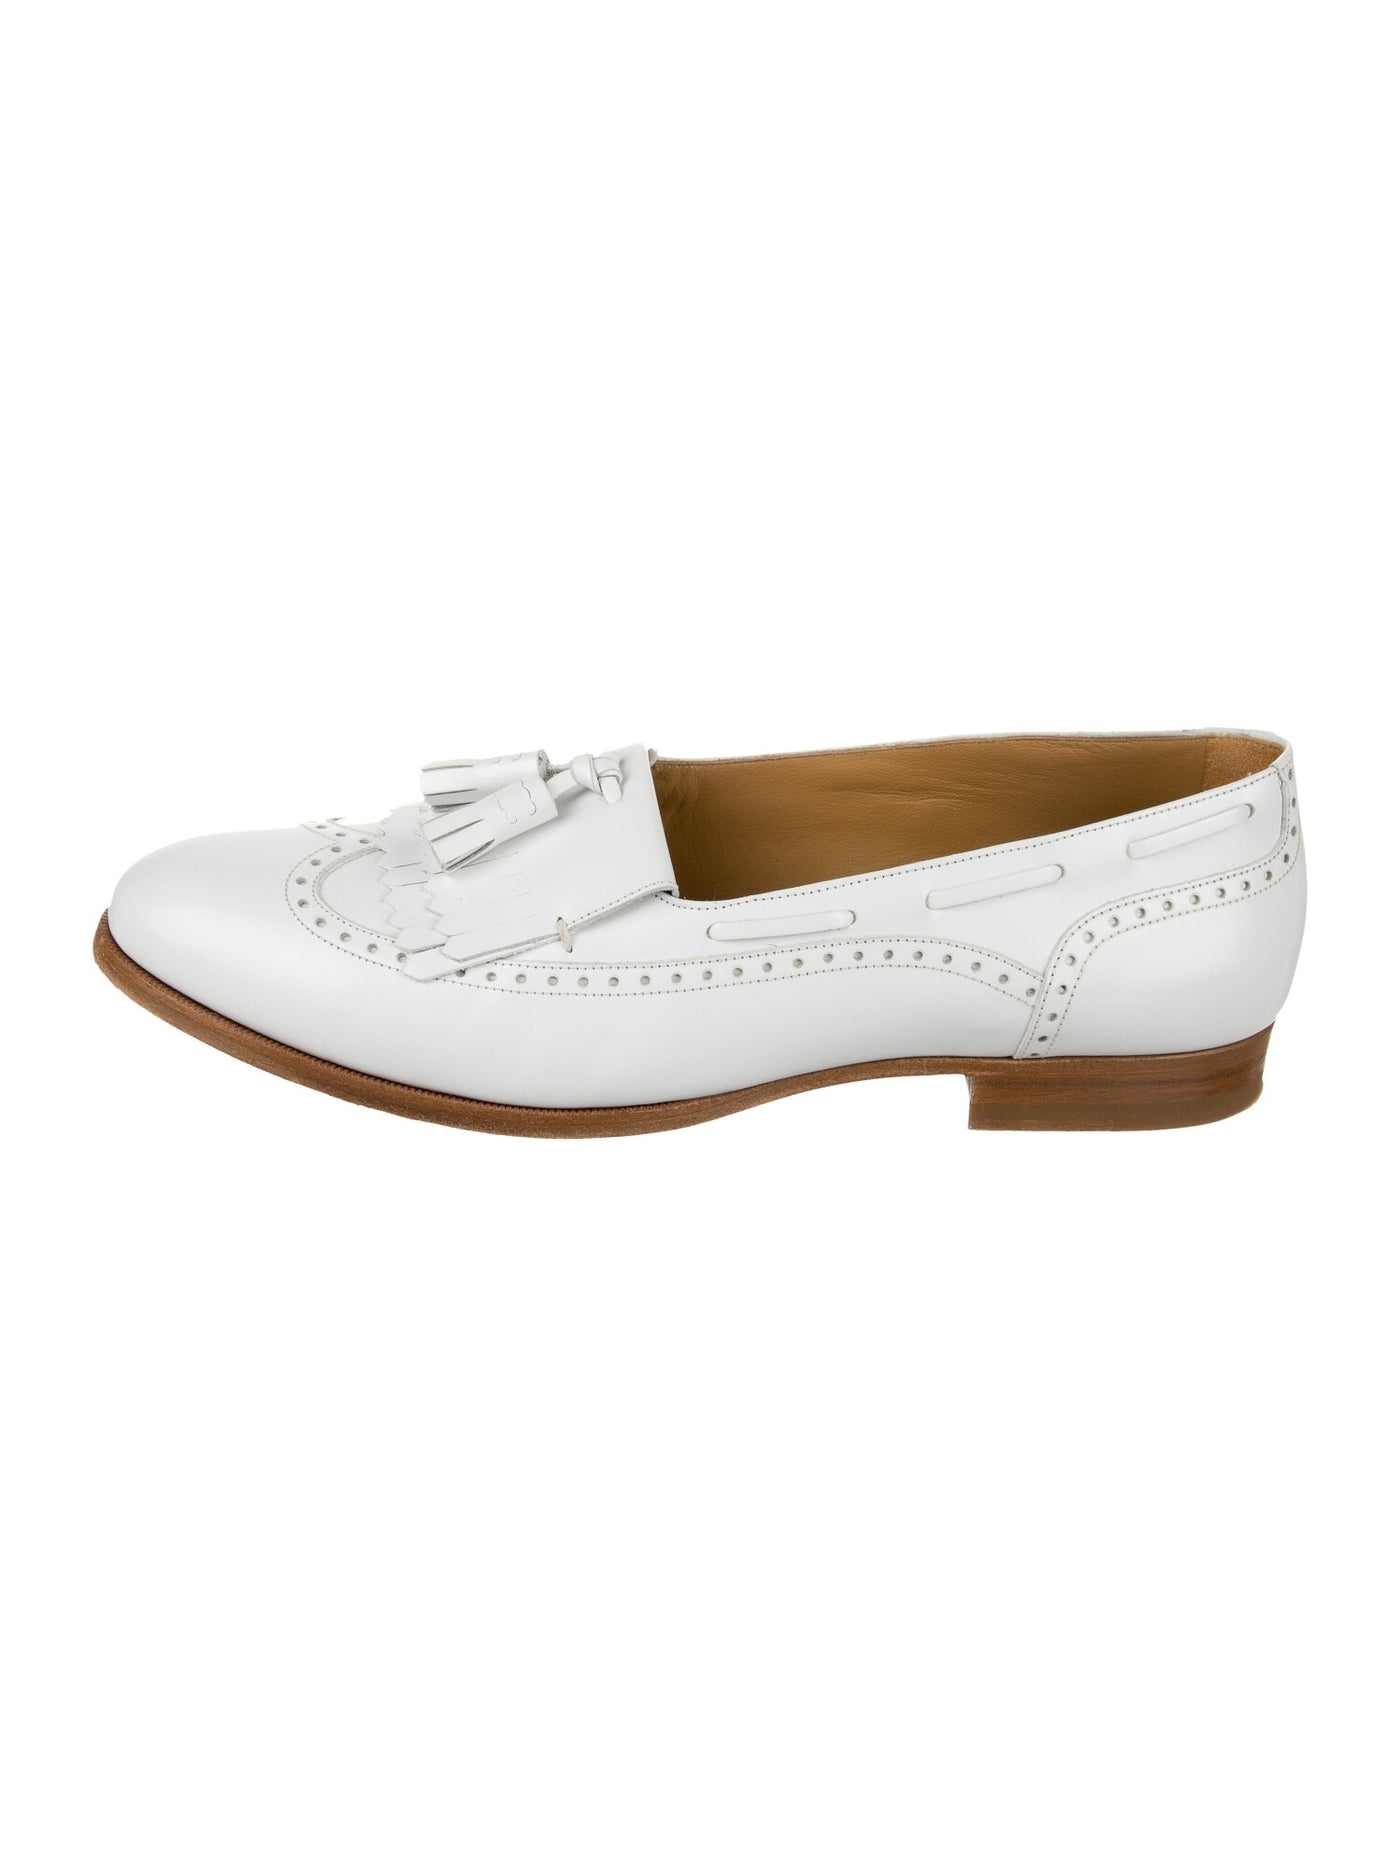 CELINE Womens White Stitch Detailing Perforated Tasseled Round Toe Block Heel Slip On Leather Loafers Shoes 37.5